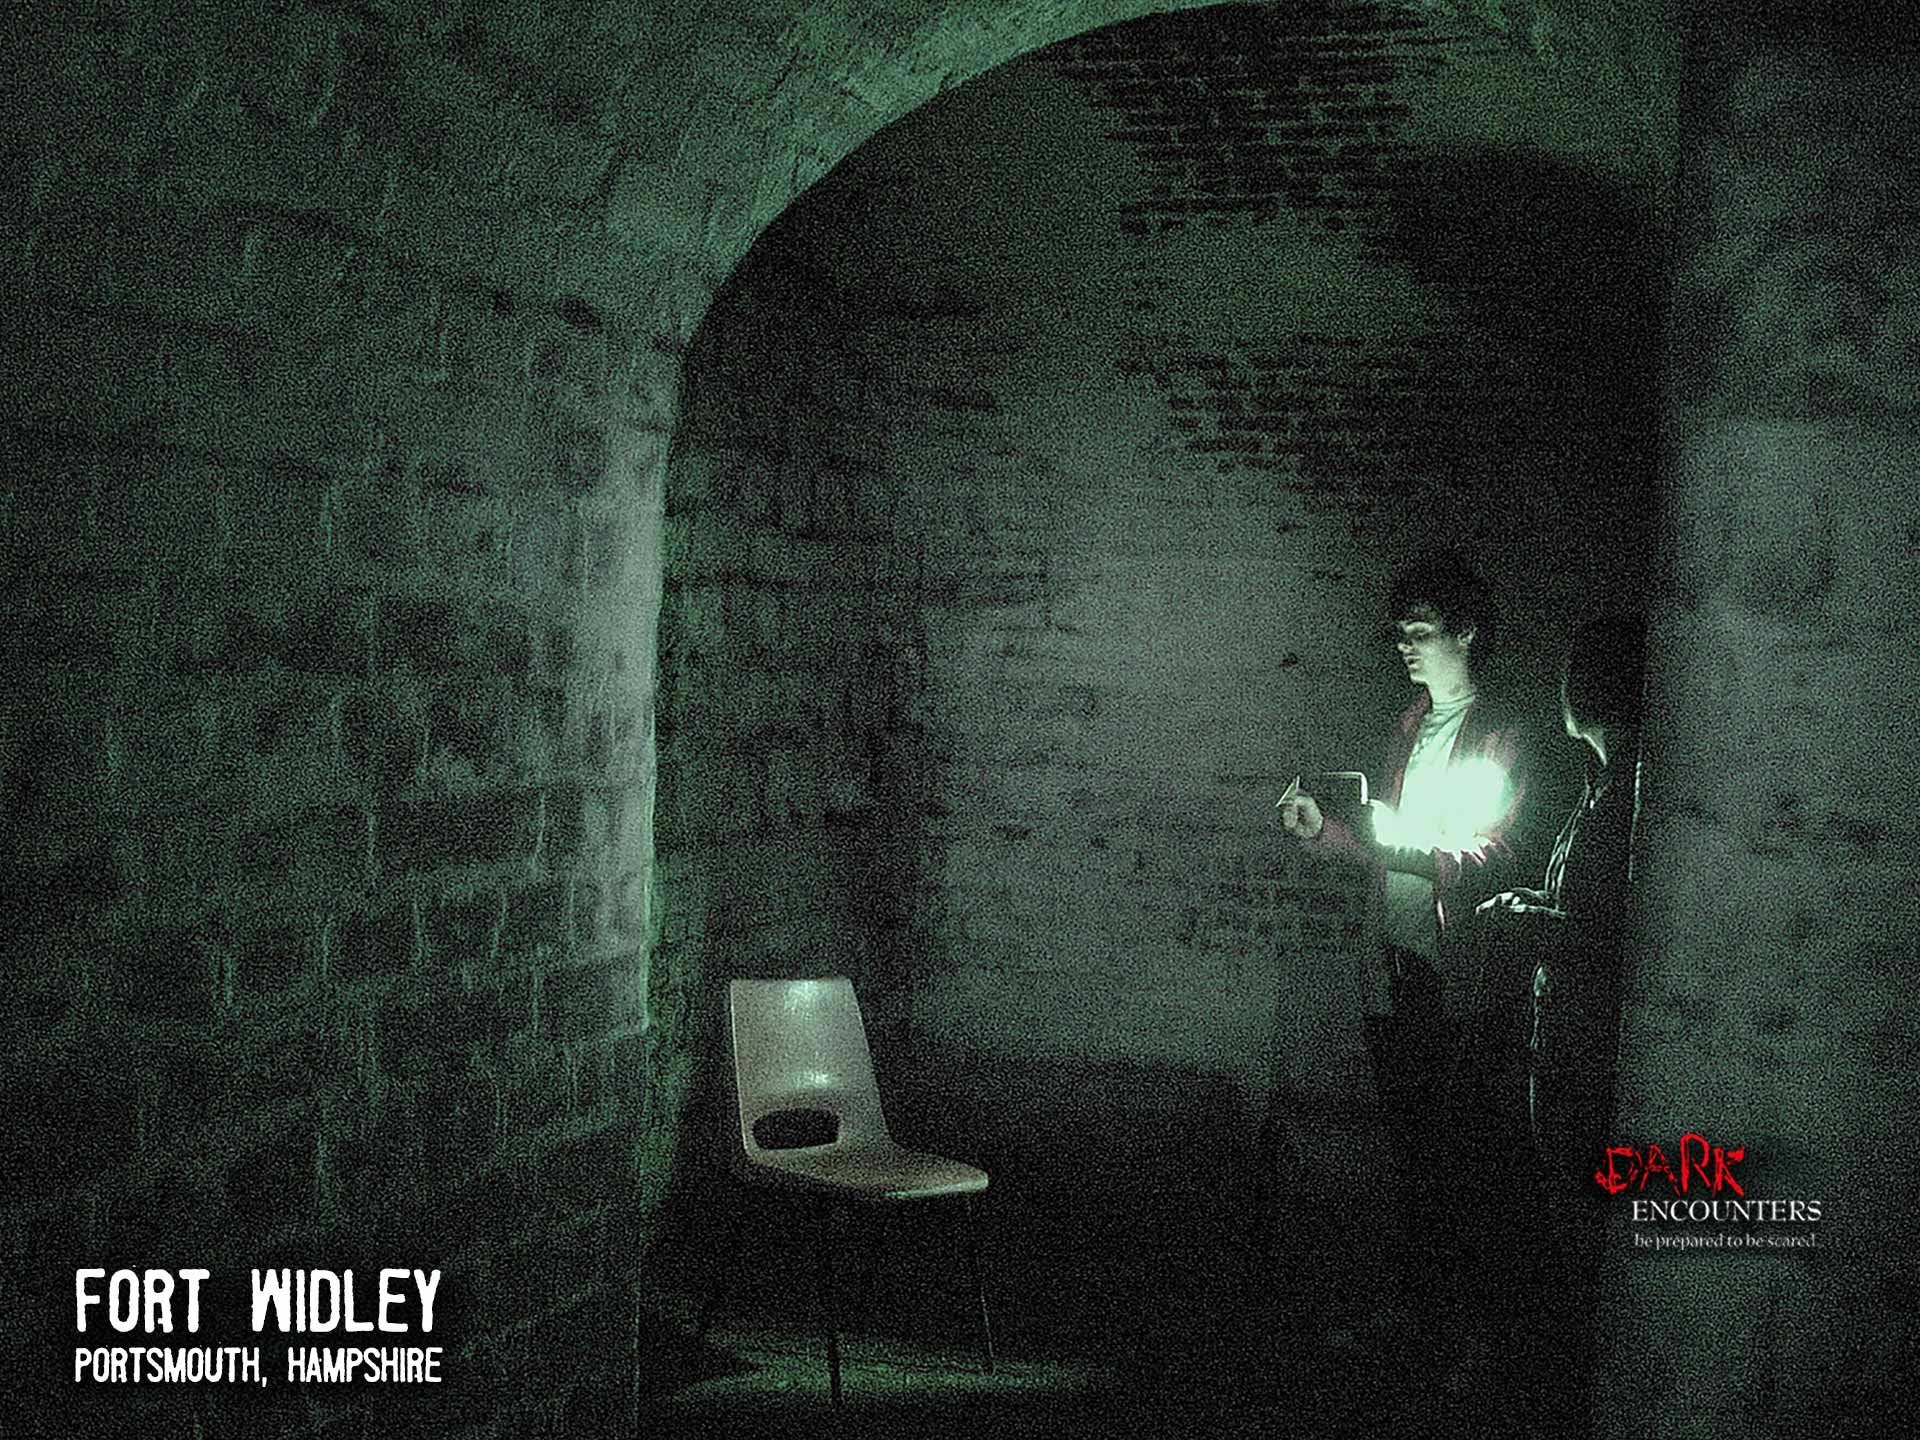 An inside view of Fort Widley, another haunted location